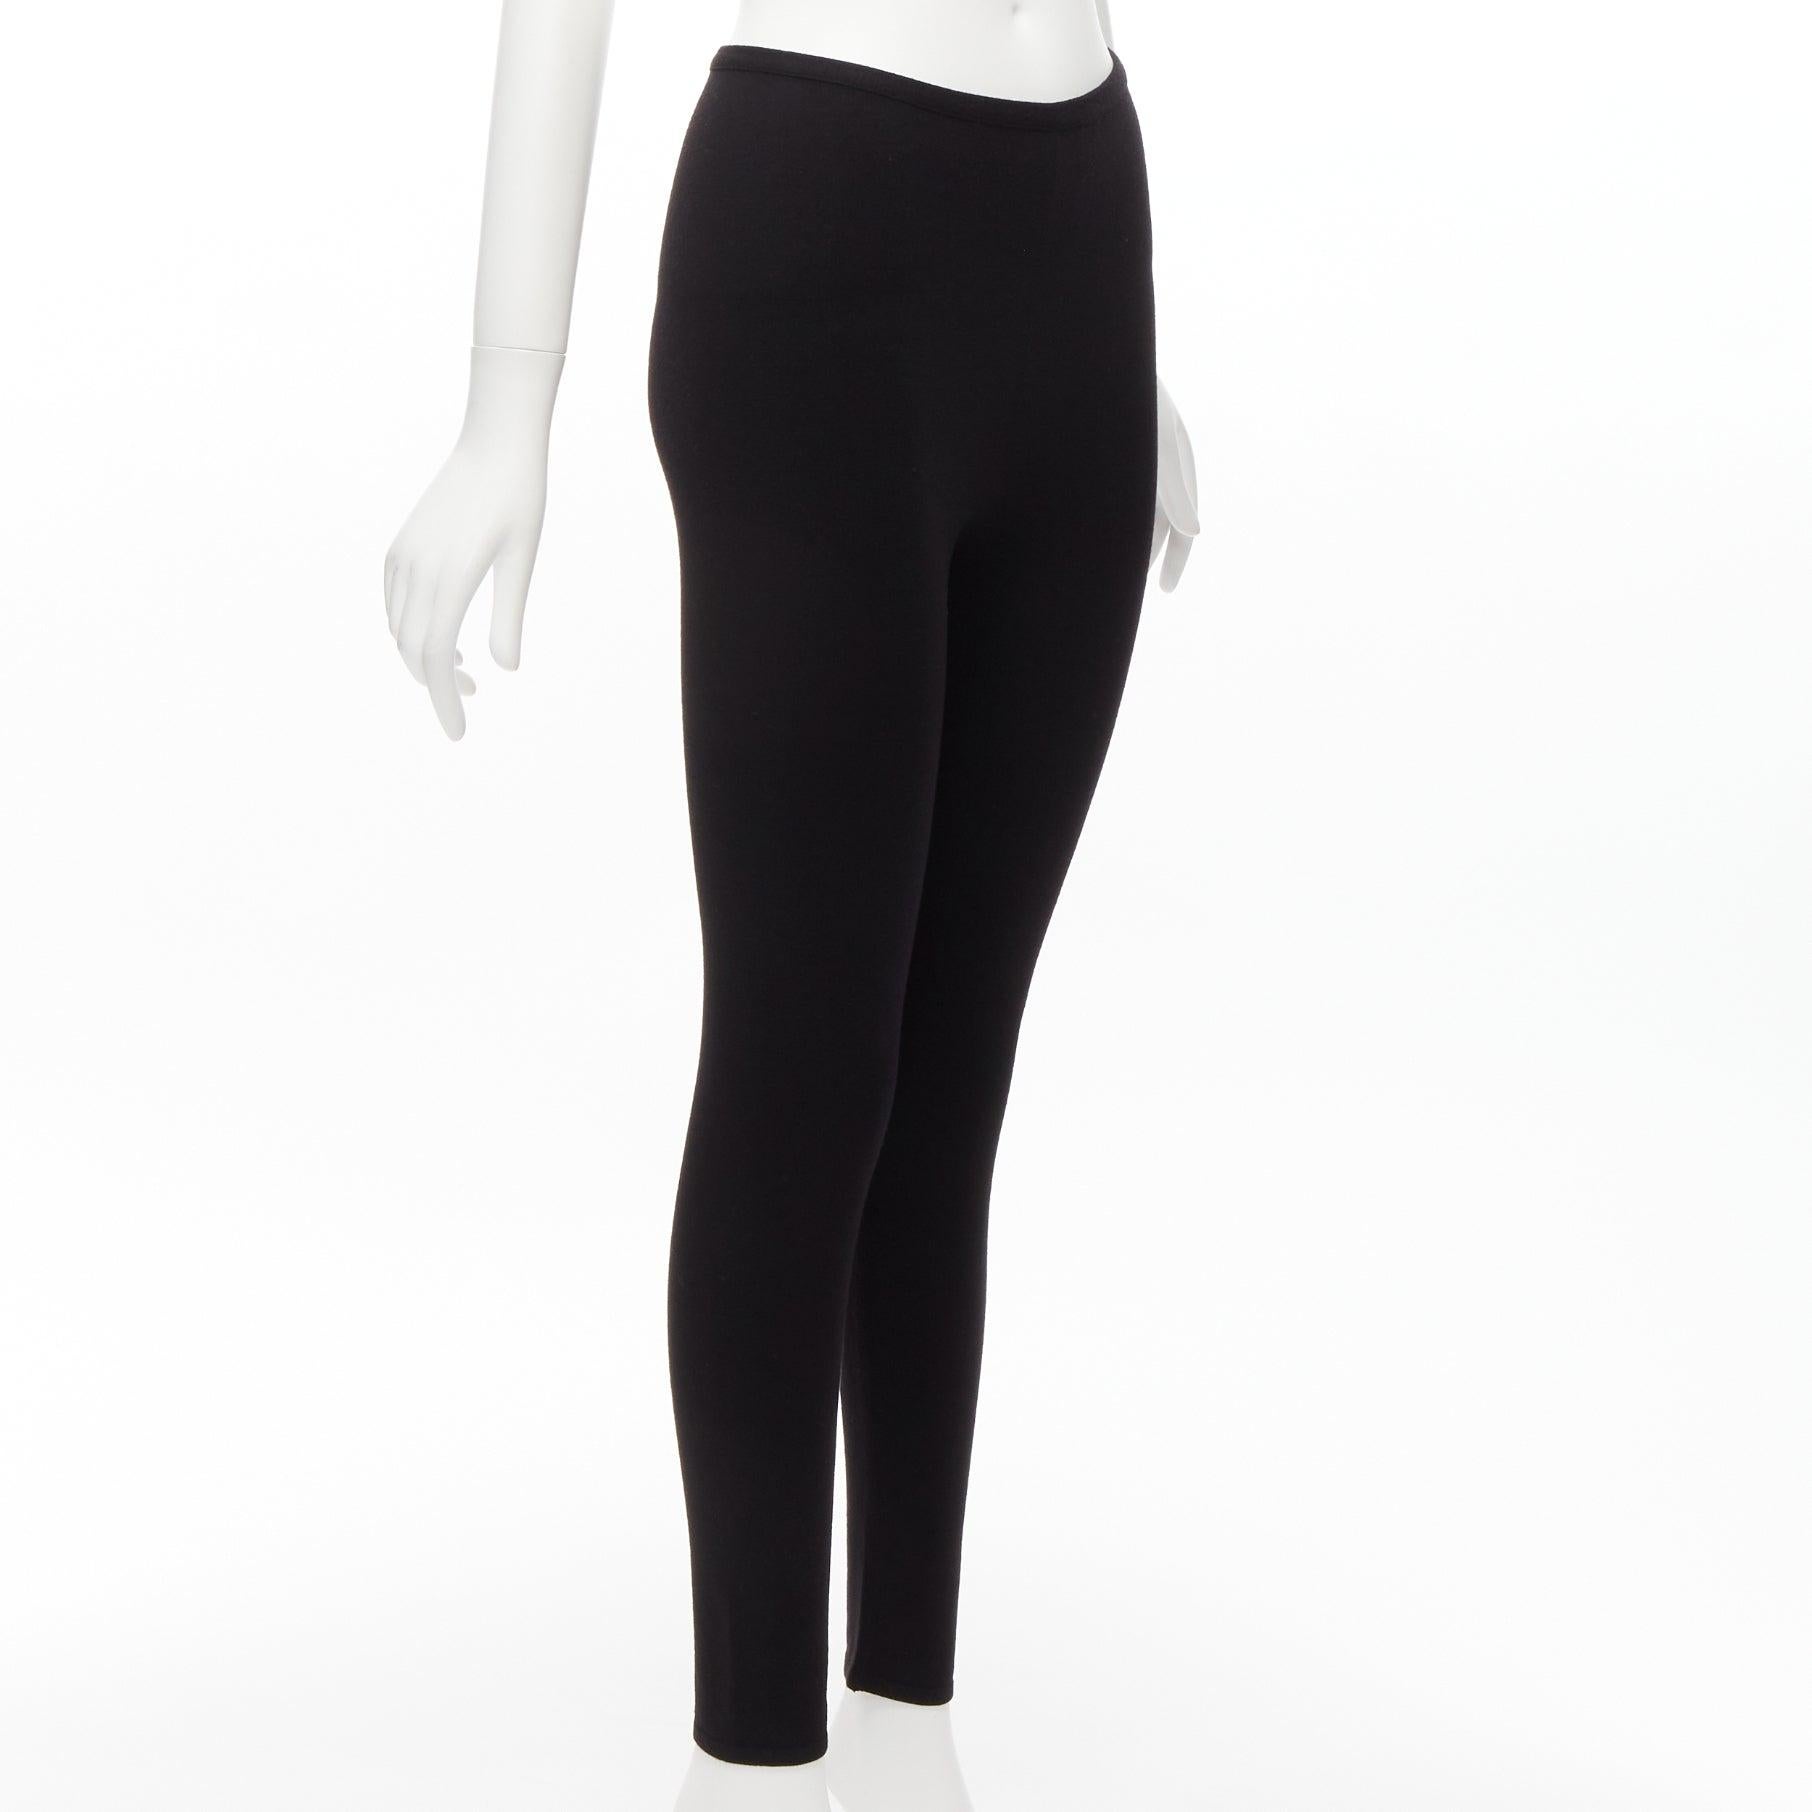 ALAIA black wool blend minimal classic soft skinny long legging FR38 M
Reference: BSHW/A00046
Brand: Alaia
Material: Wool, Blend
Color: Black
Pattern: Solid
Closure: Elasticated
Made in: Italy

CONDITION:
Condition: Excellent, this item was